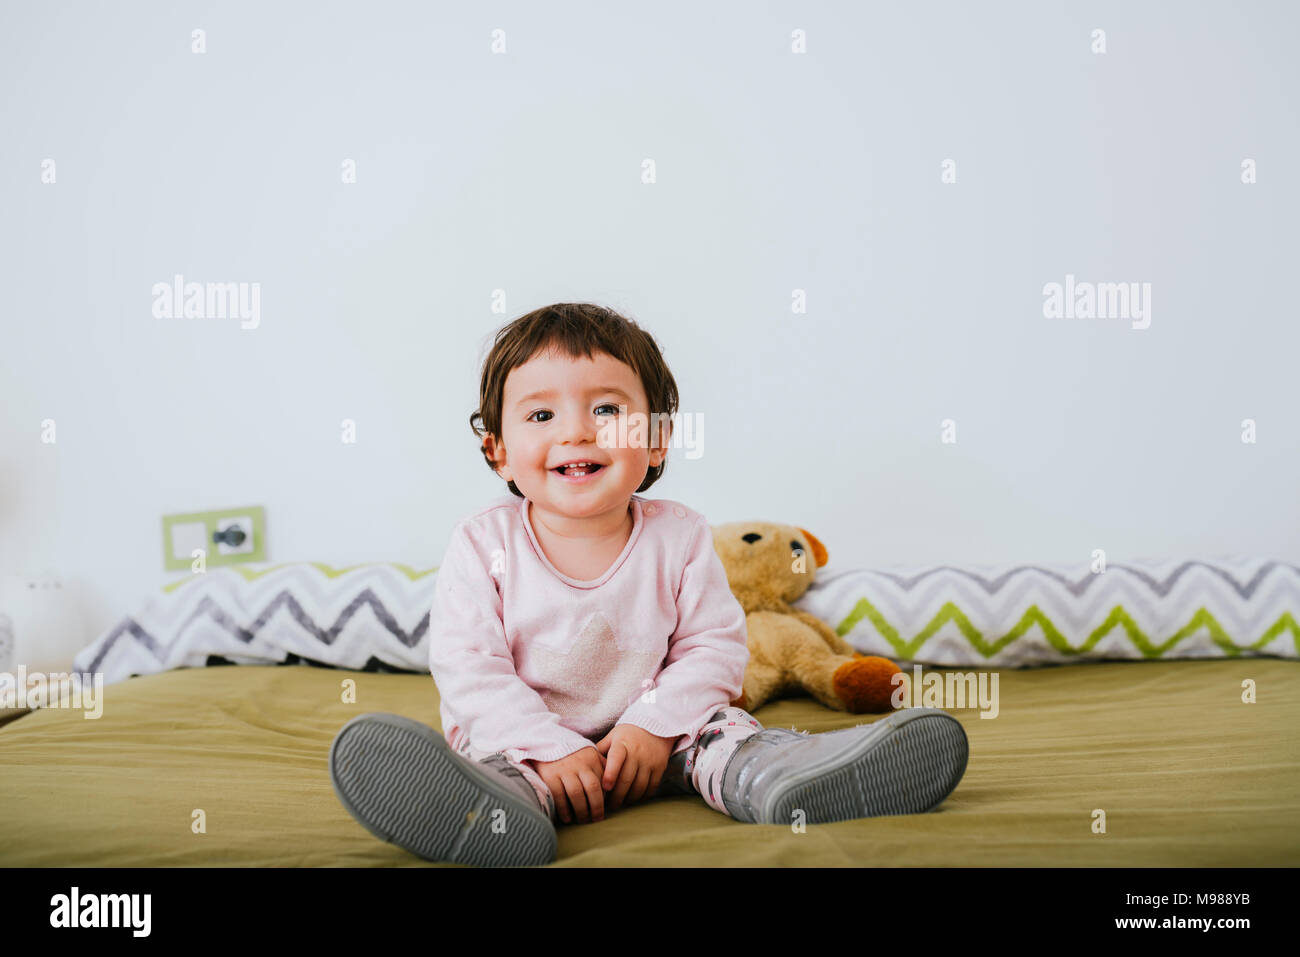 Portrait of happy baby girl sitting on bed Banque D'Images